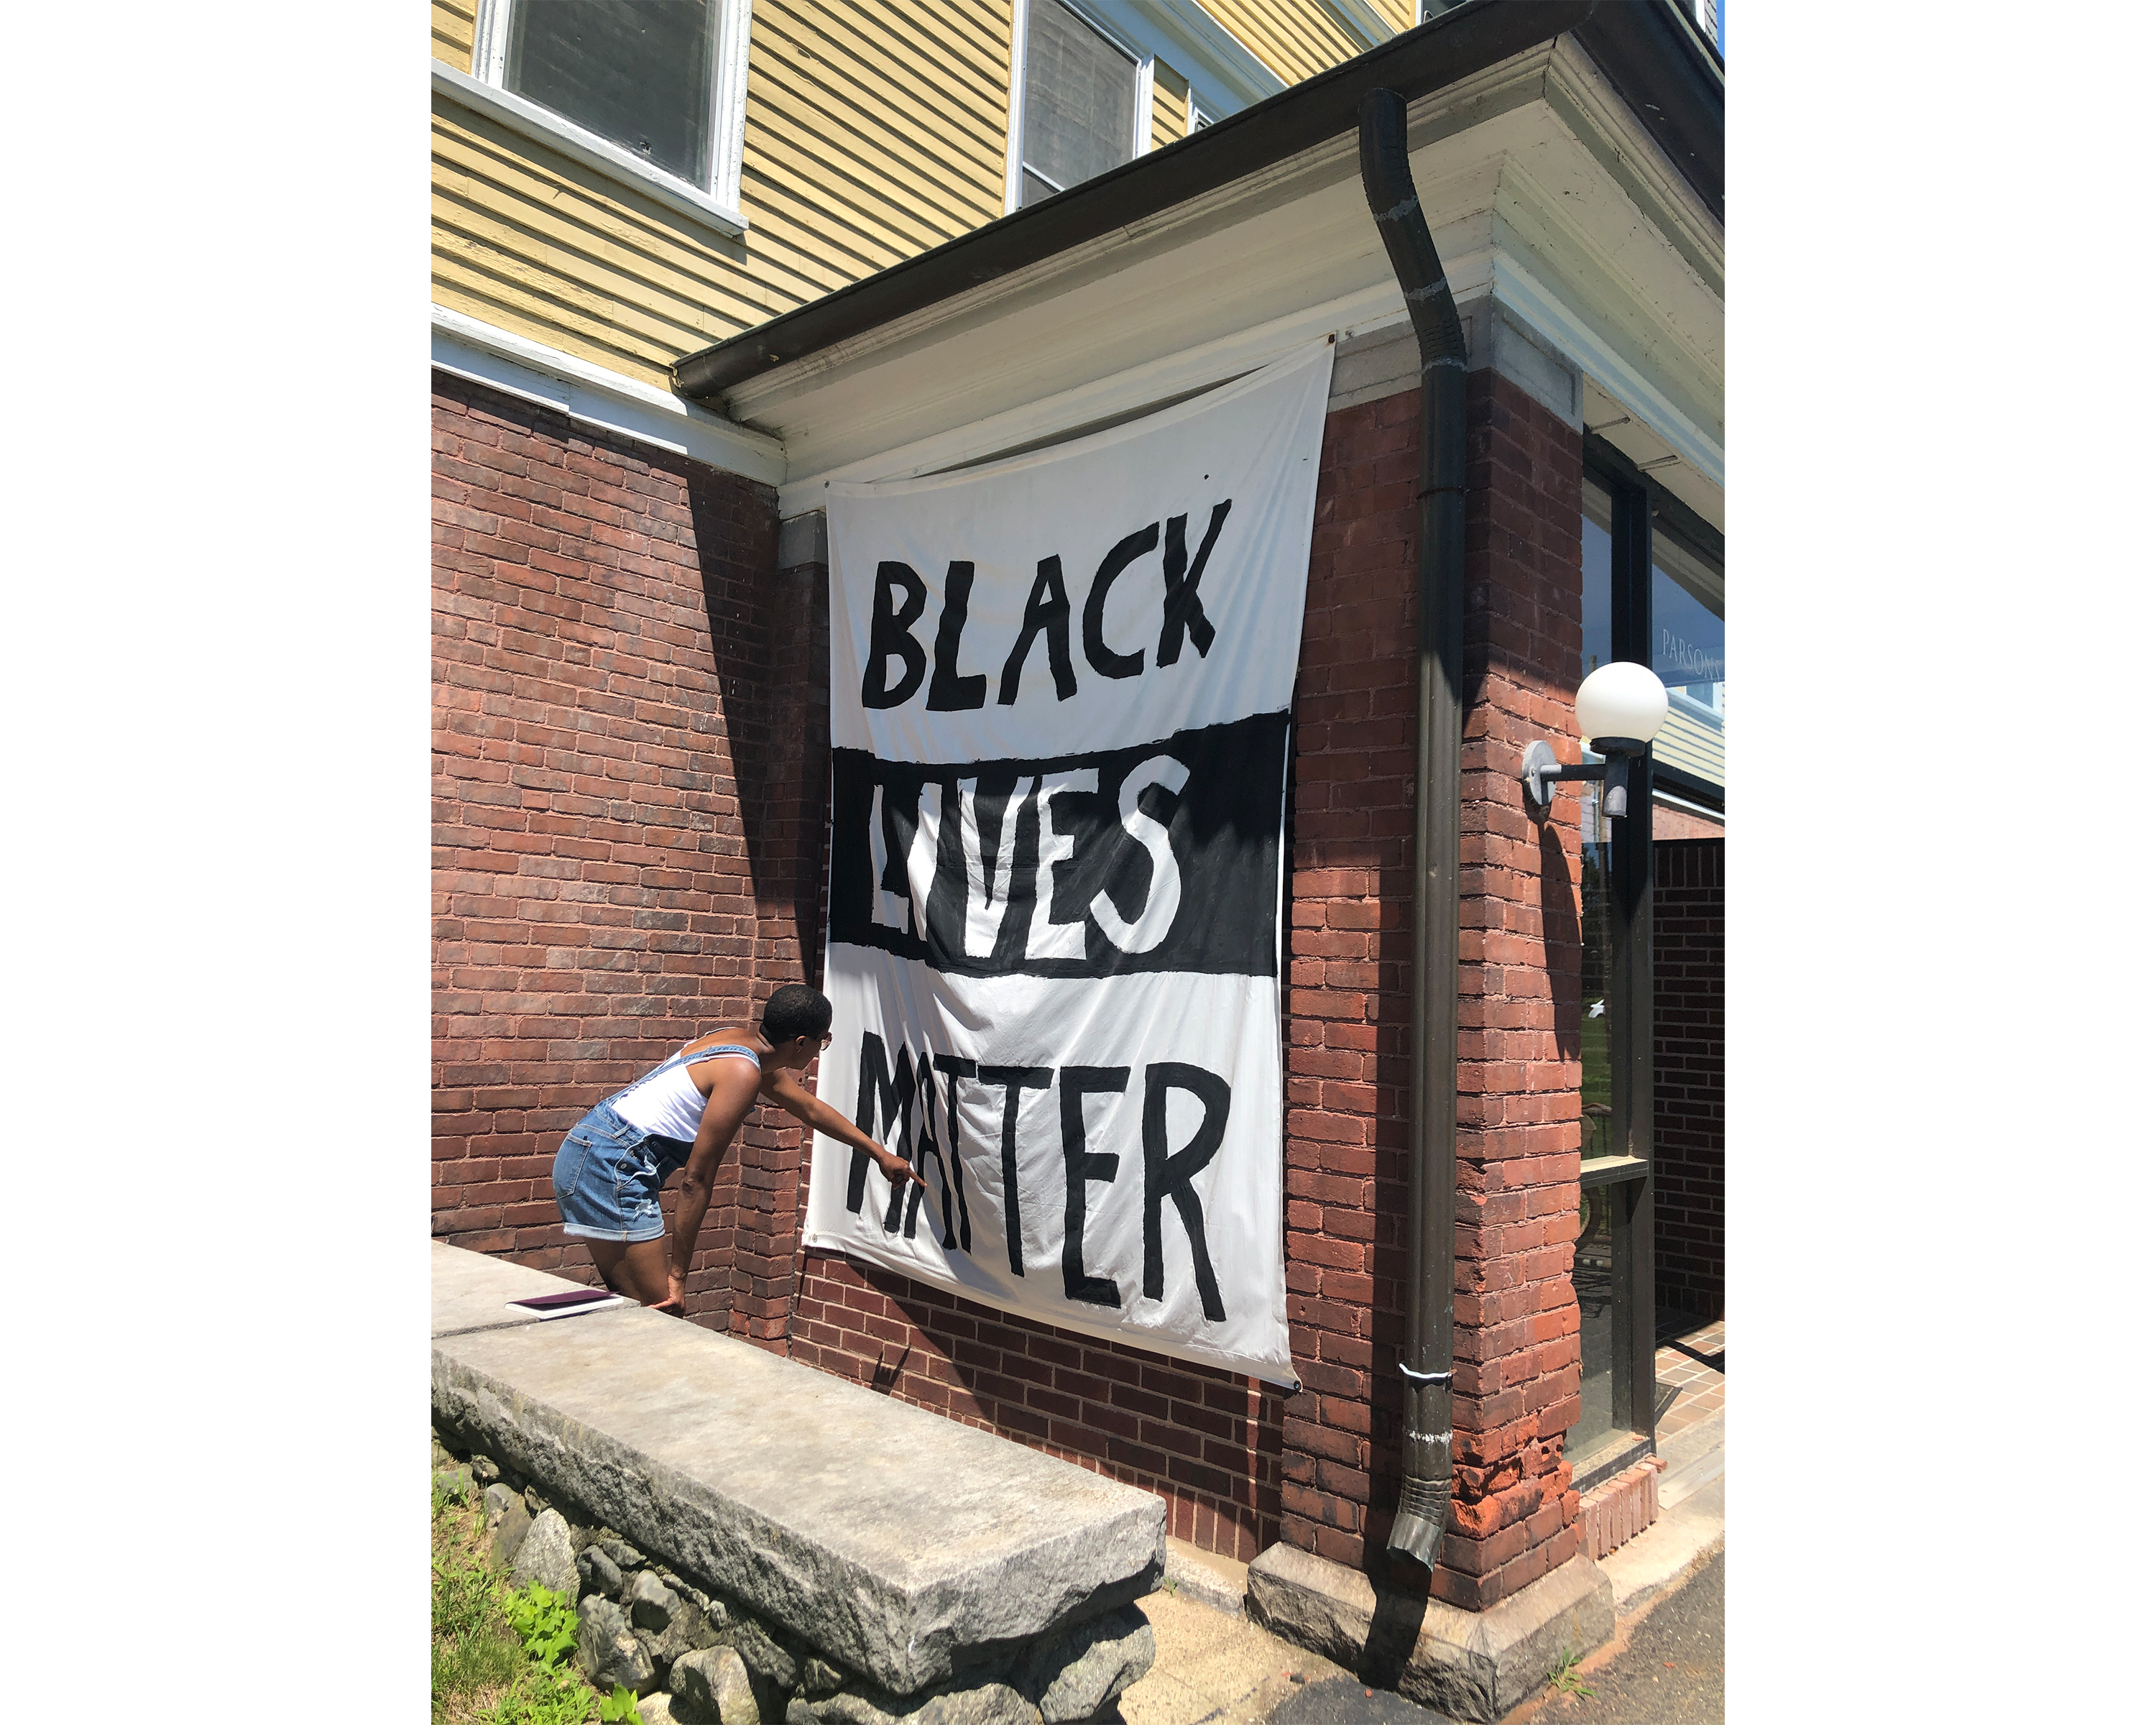 Amanda Williams next to a Black Lives Matter banner outside a Smith College house/dorm